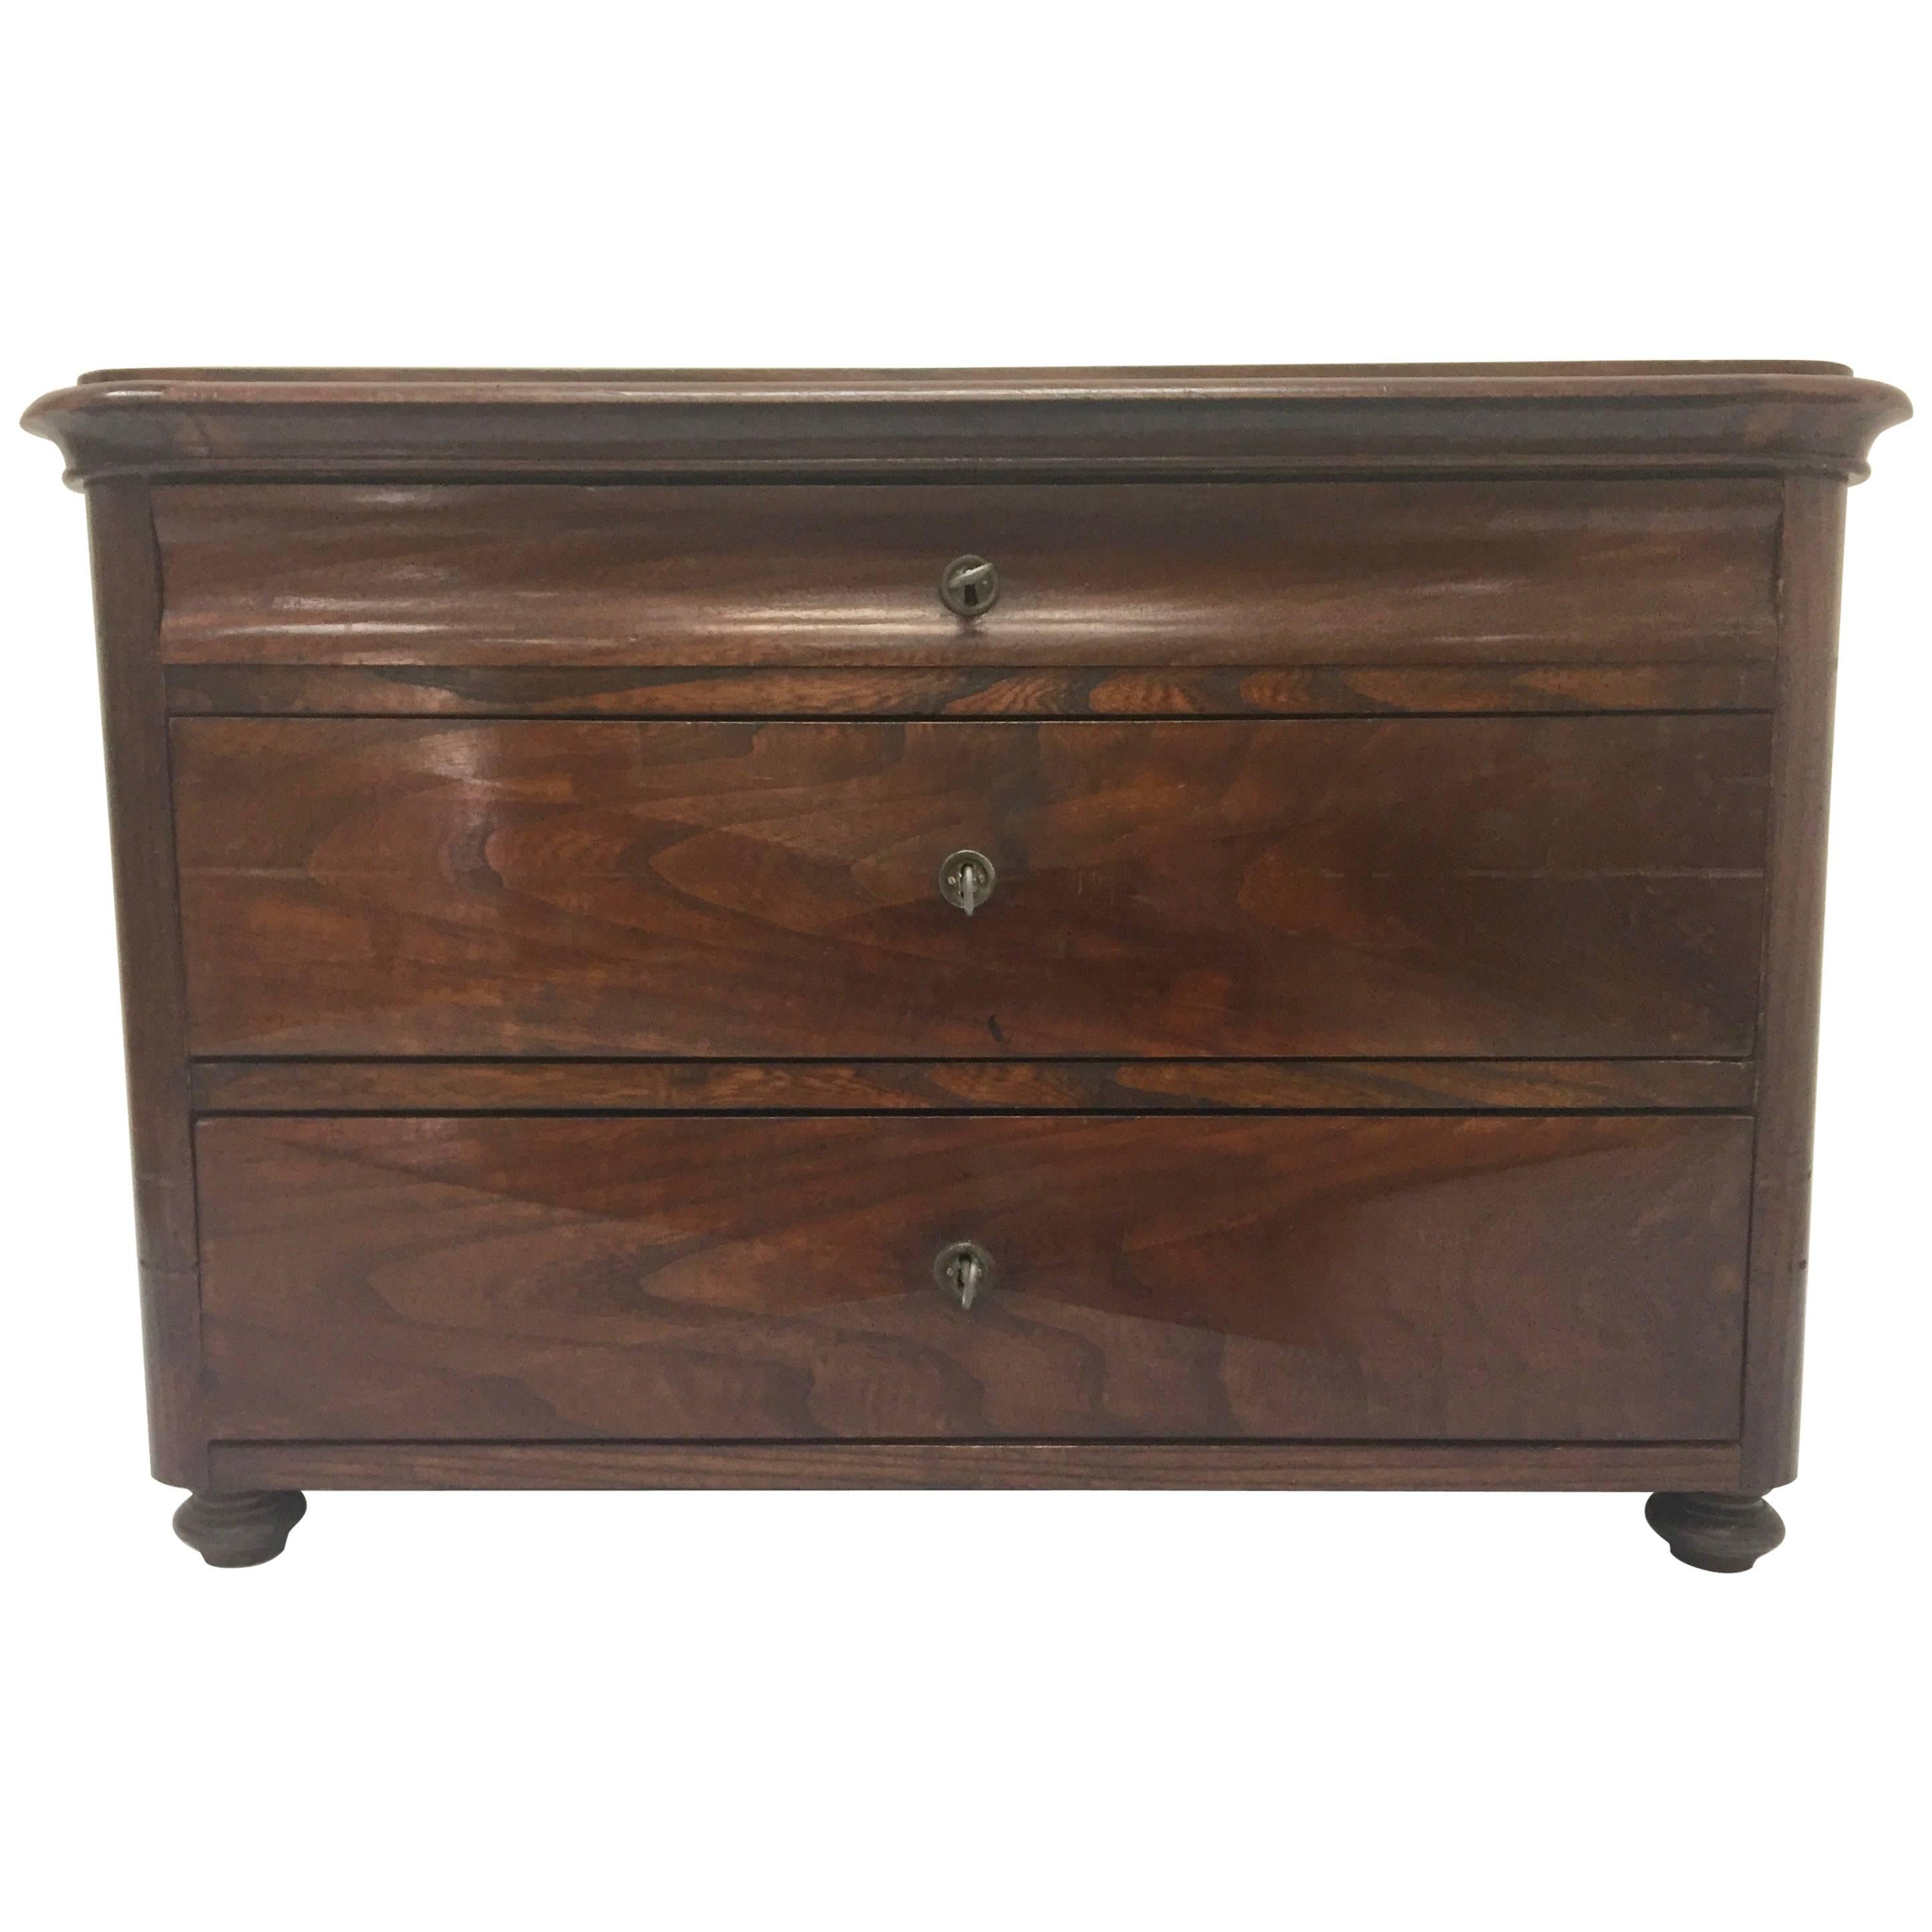 Walnut Louis-Philippe Three-Drawer Chest or Commode